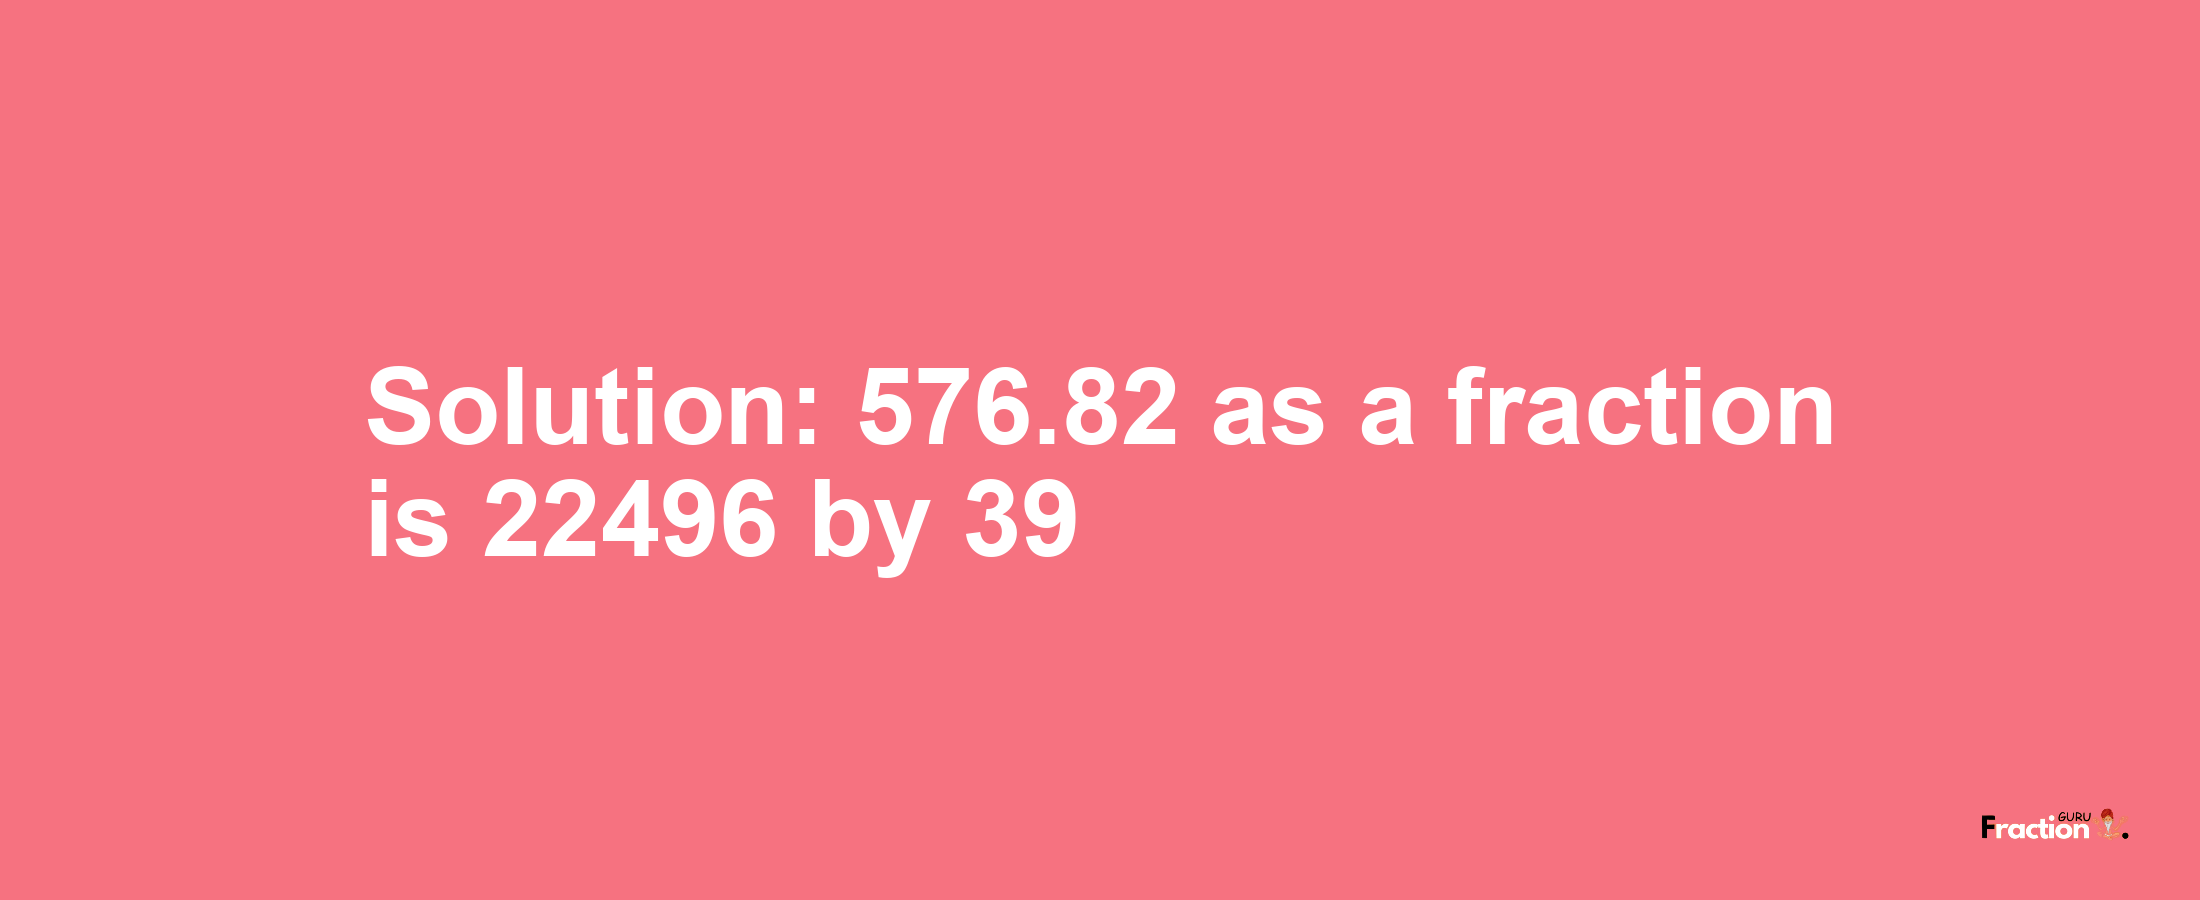 Solution:576.82 as a fraction is 22496/39